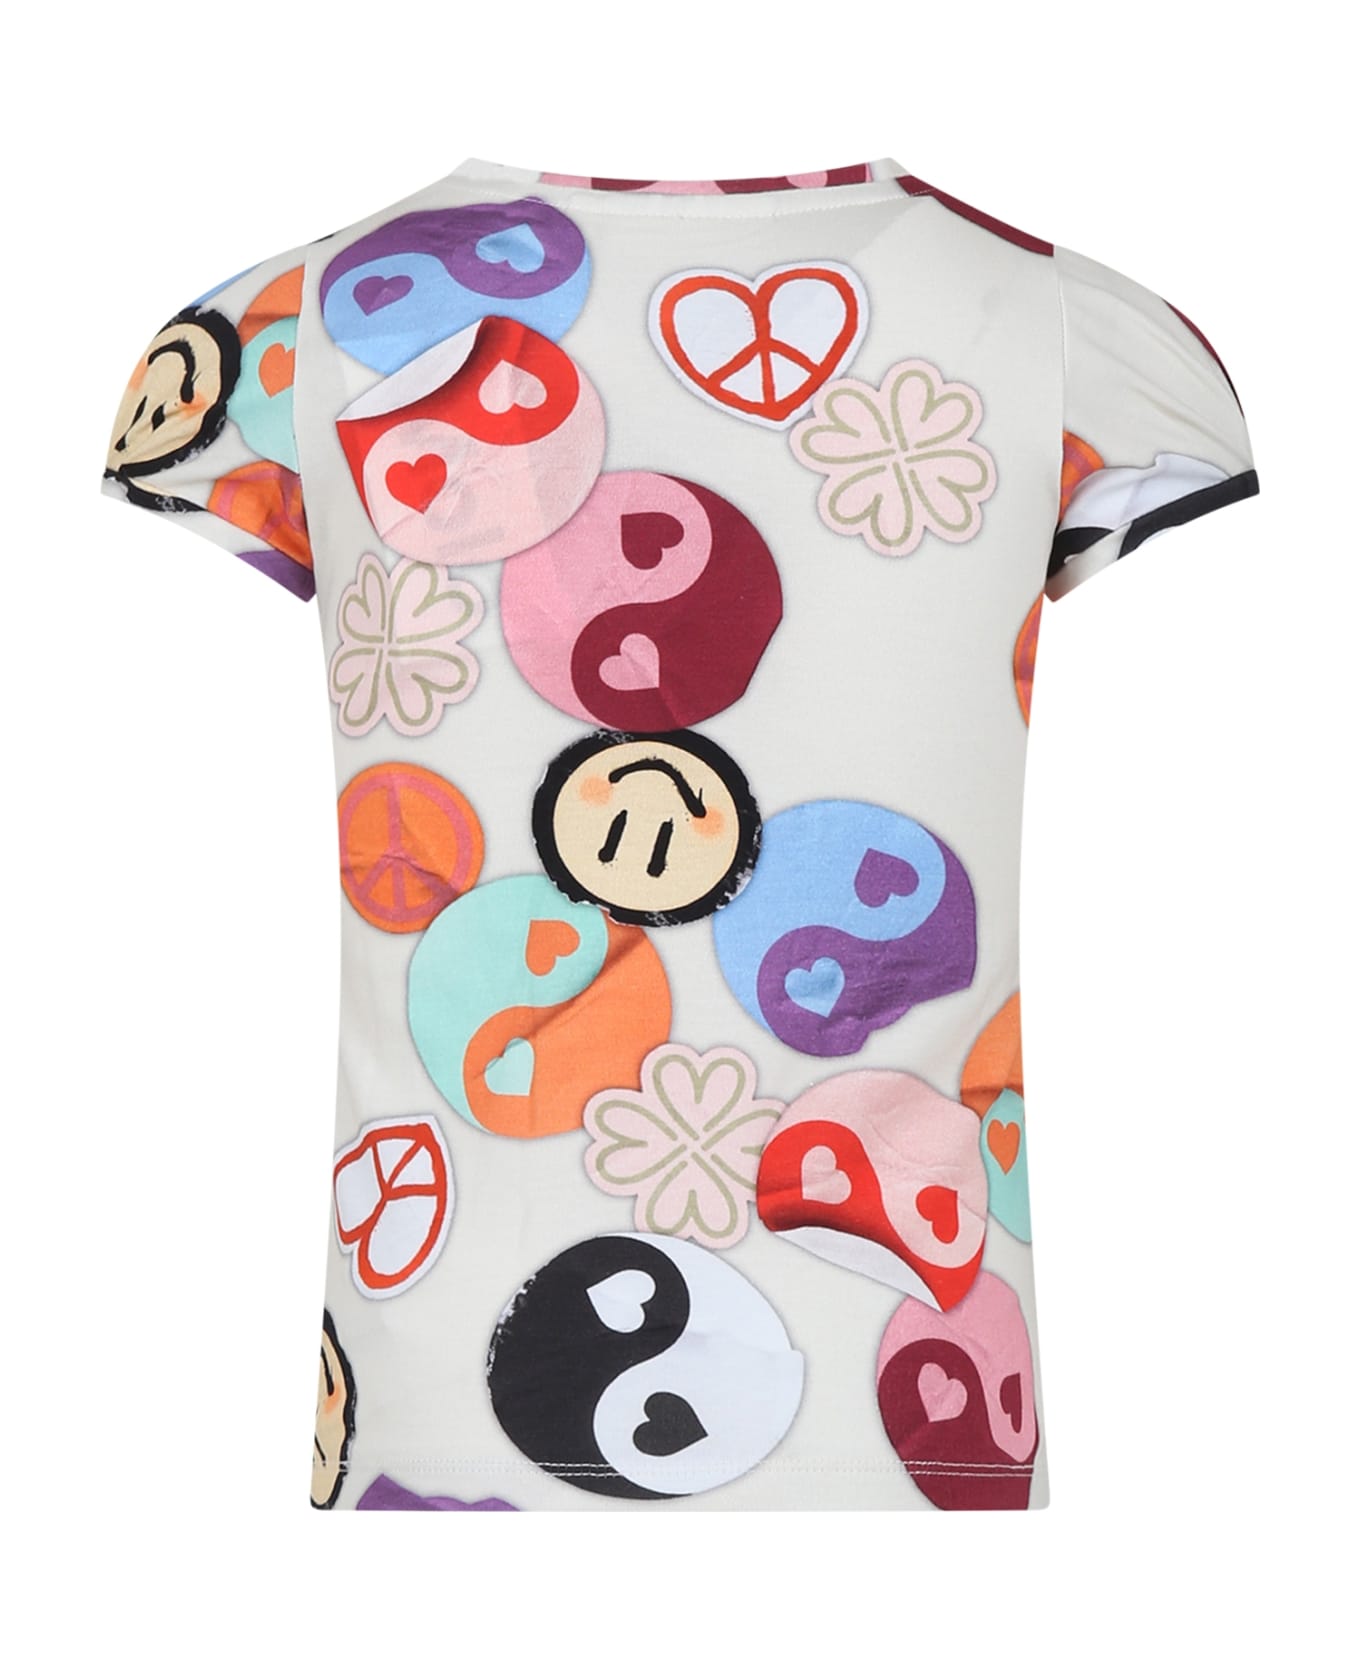 Molo Ivory T-shirt For Girl With Smiley - Multicolor